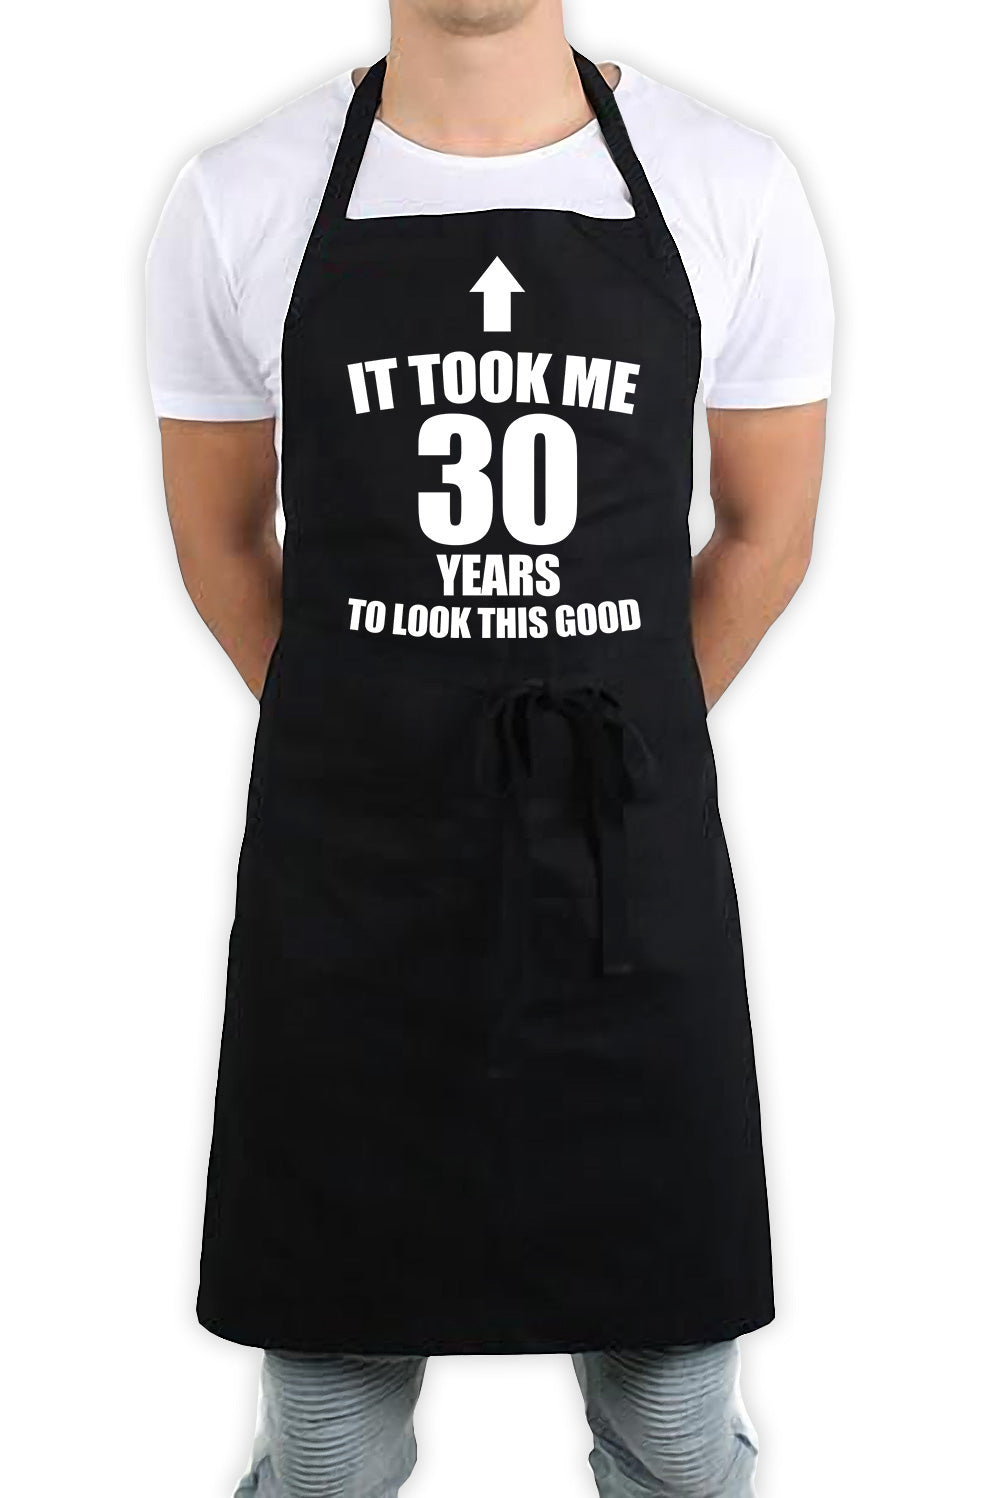 It Took Me 30 Years To Look This Good Funny Kitchen BBQ Apron Black